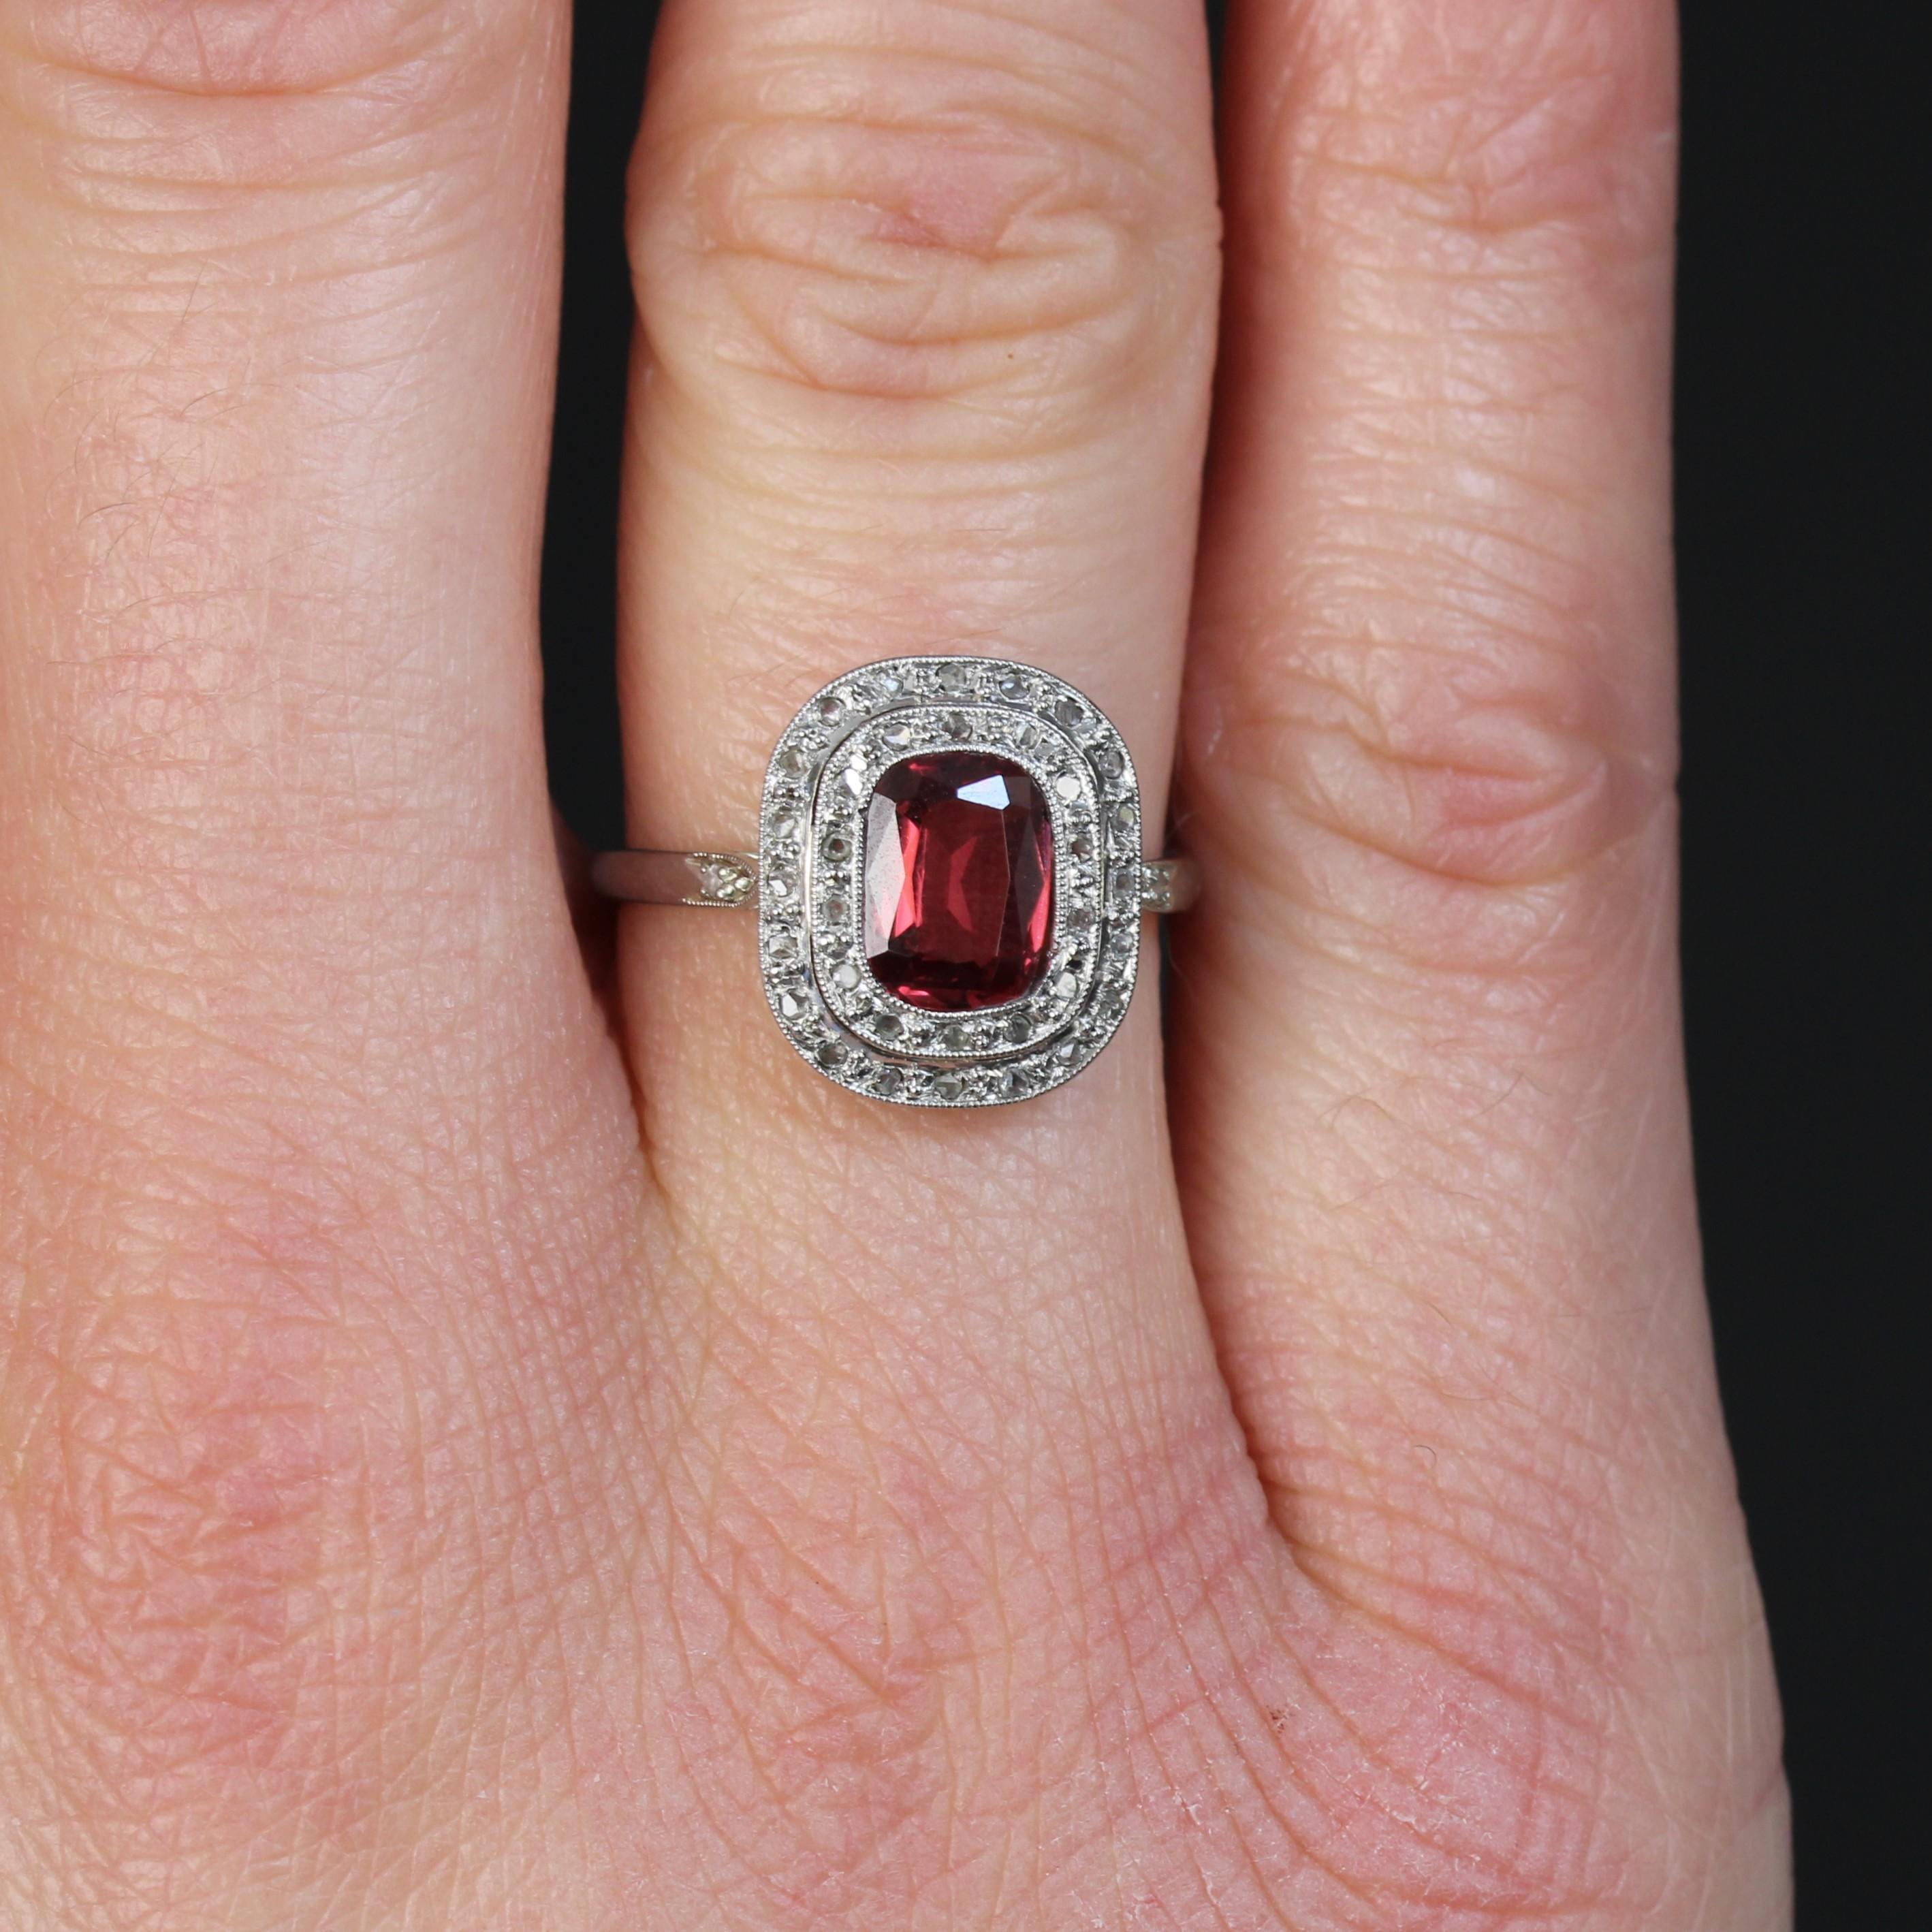 Women's French 1930s 1.20 Carat Red Spinel Diamonds 18 Karat White Gold Ring For Sale